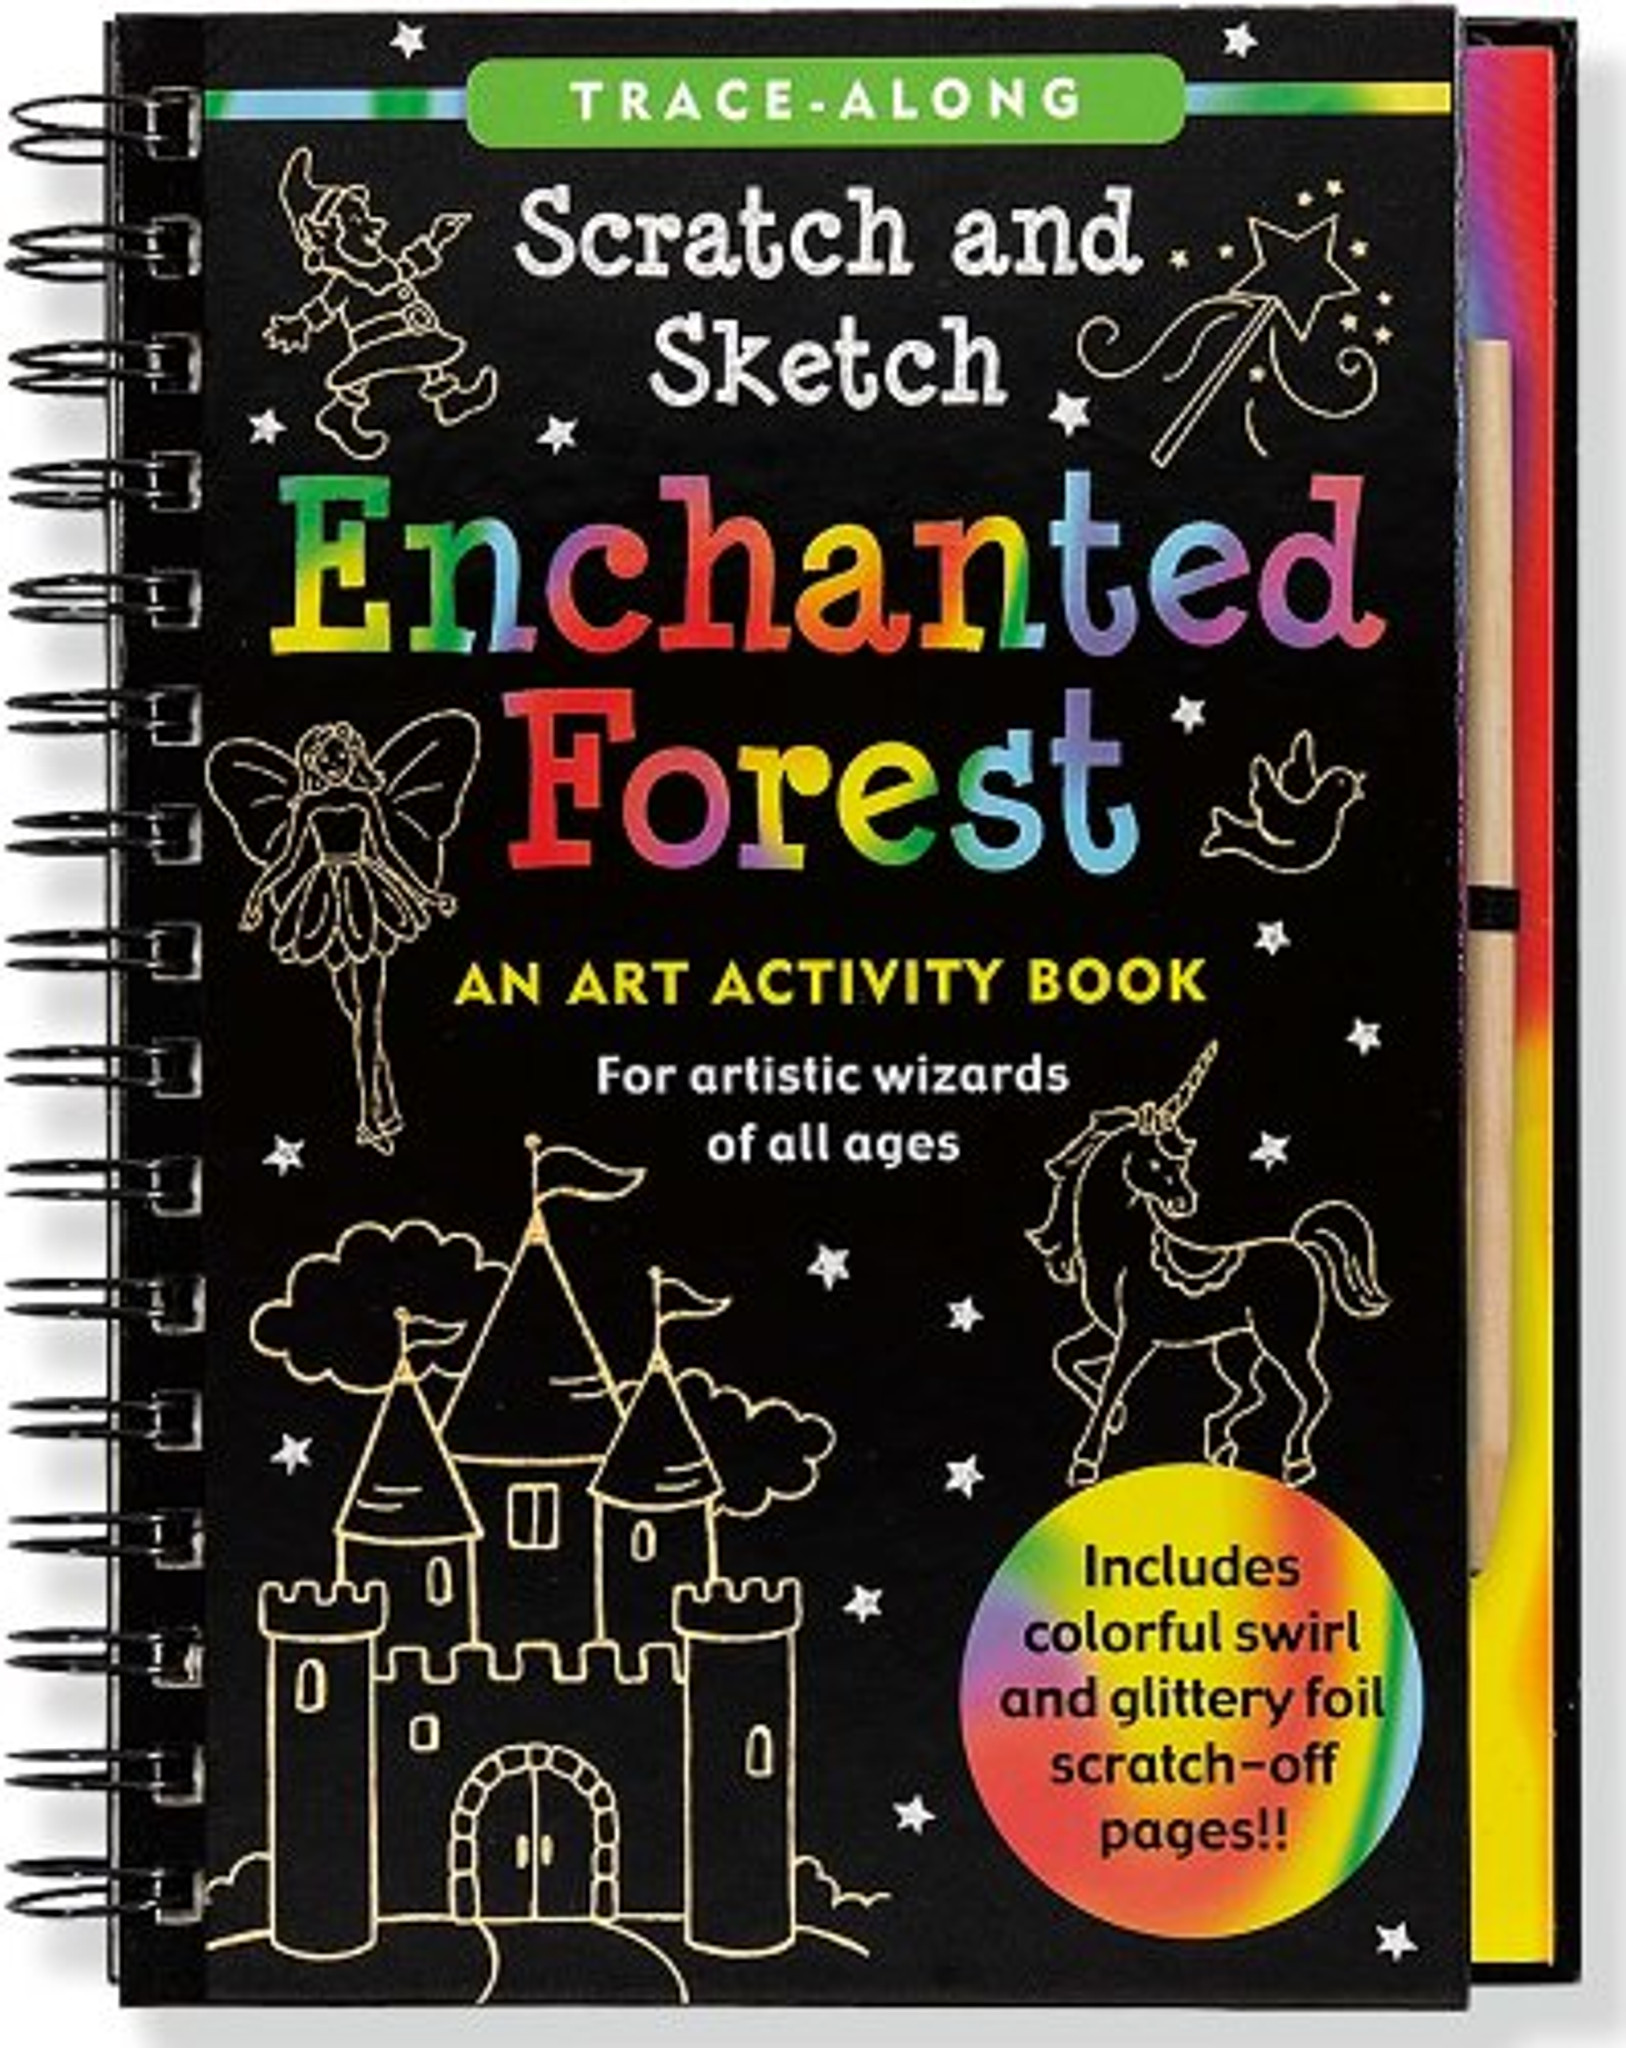 Scratch & Sketch - Enchanted Forest - The Smiley Barn